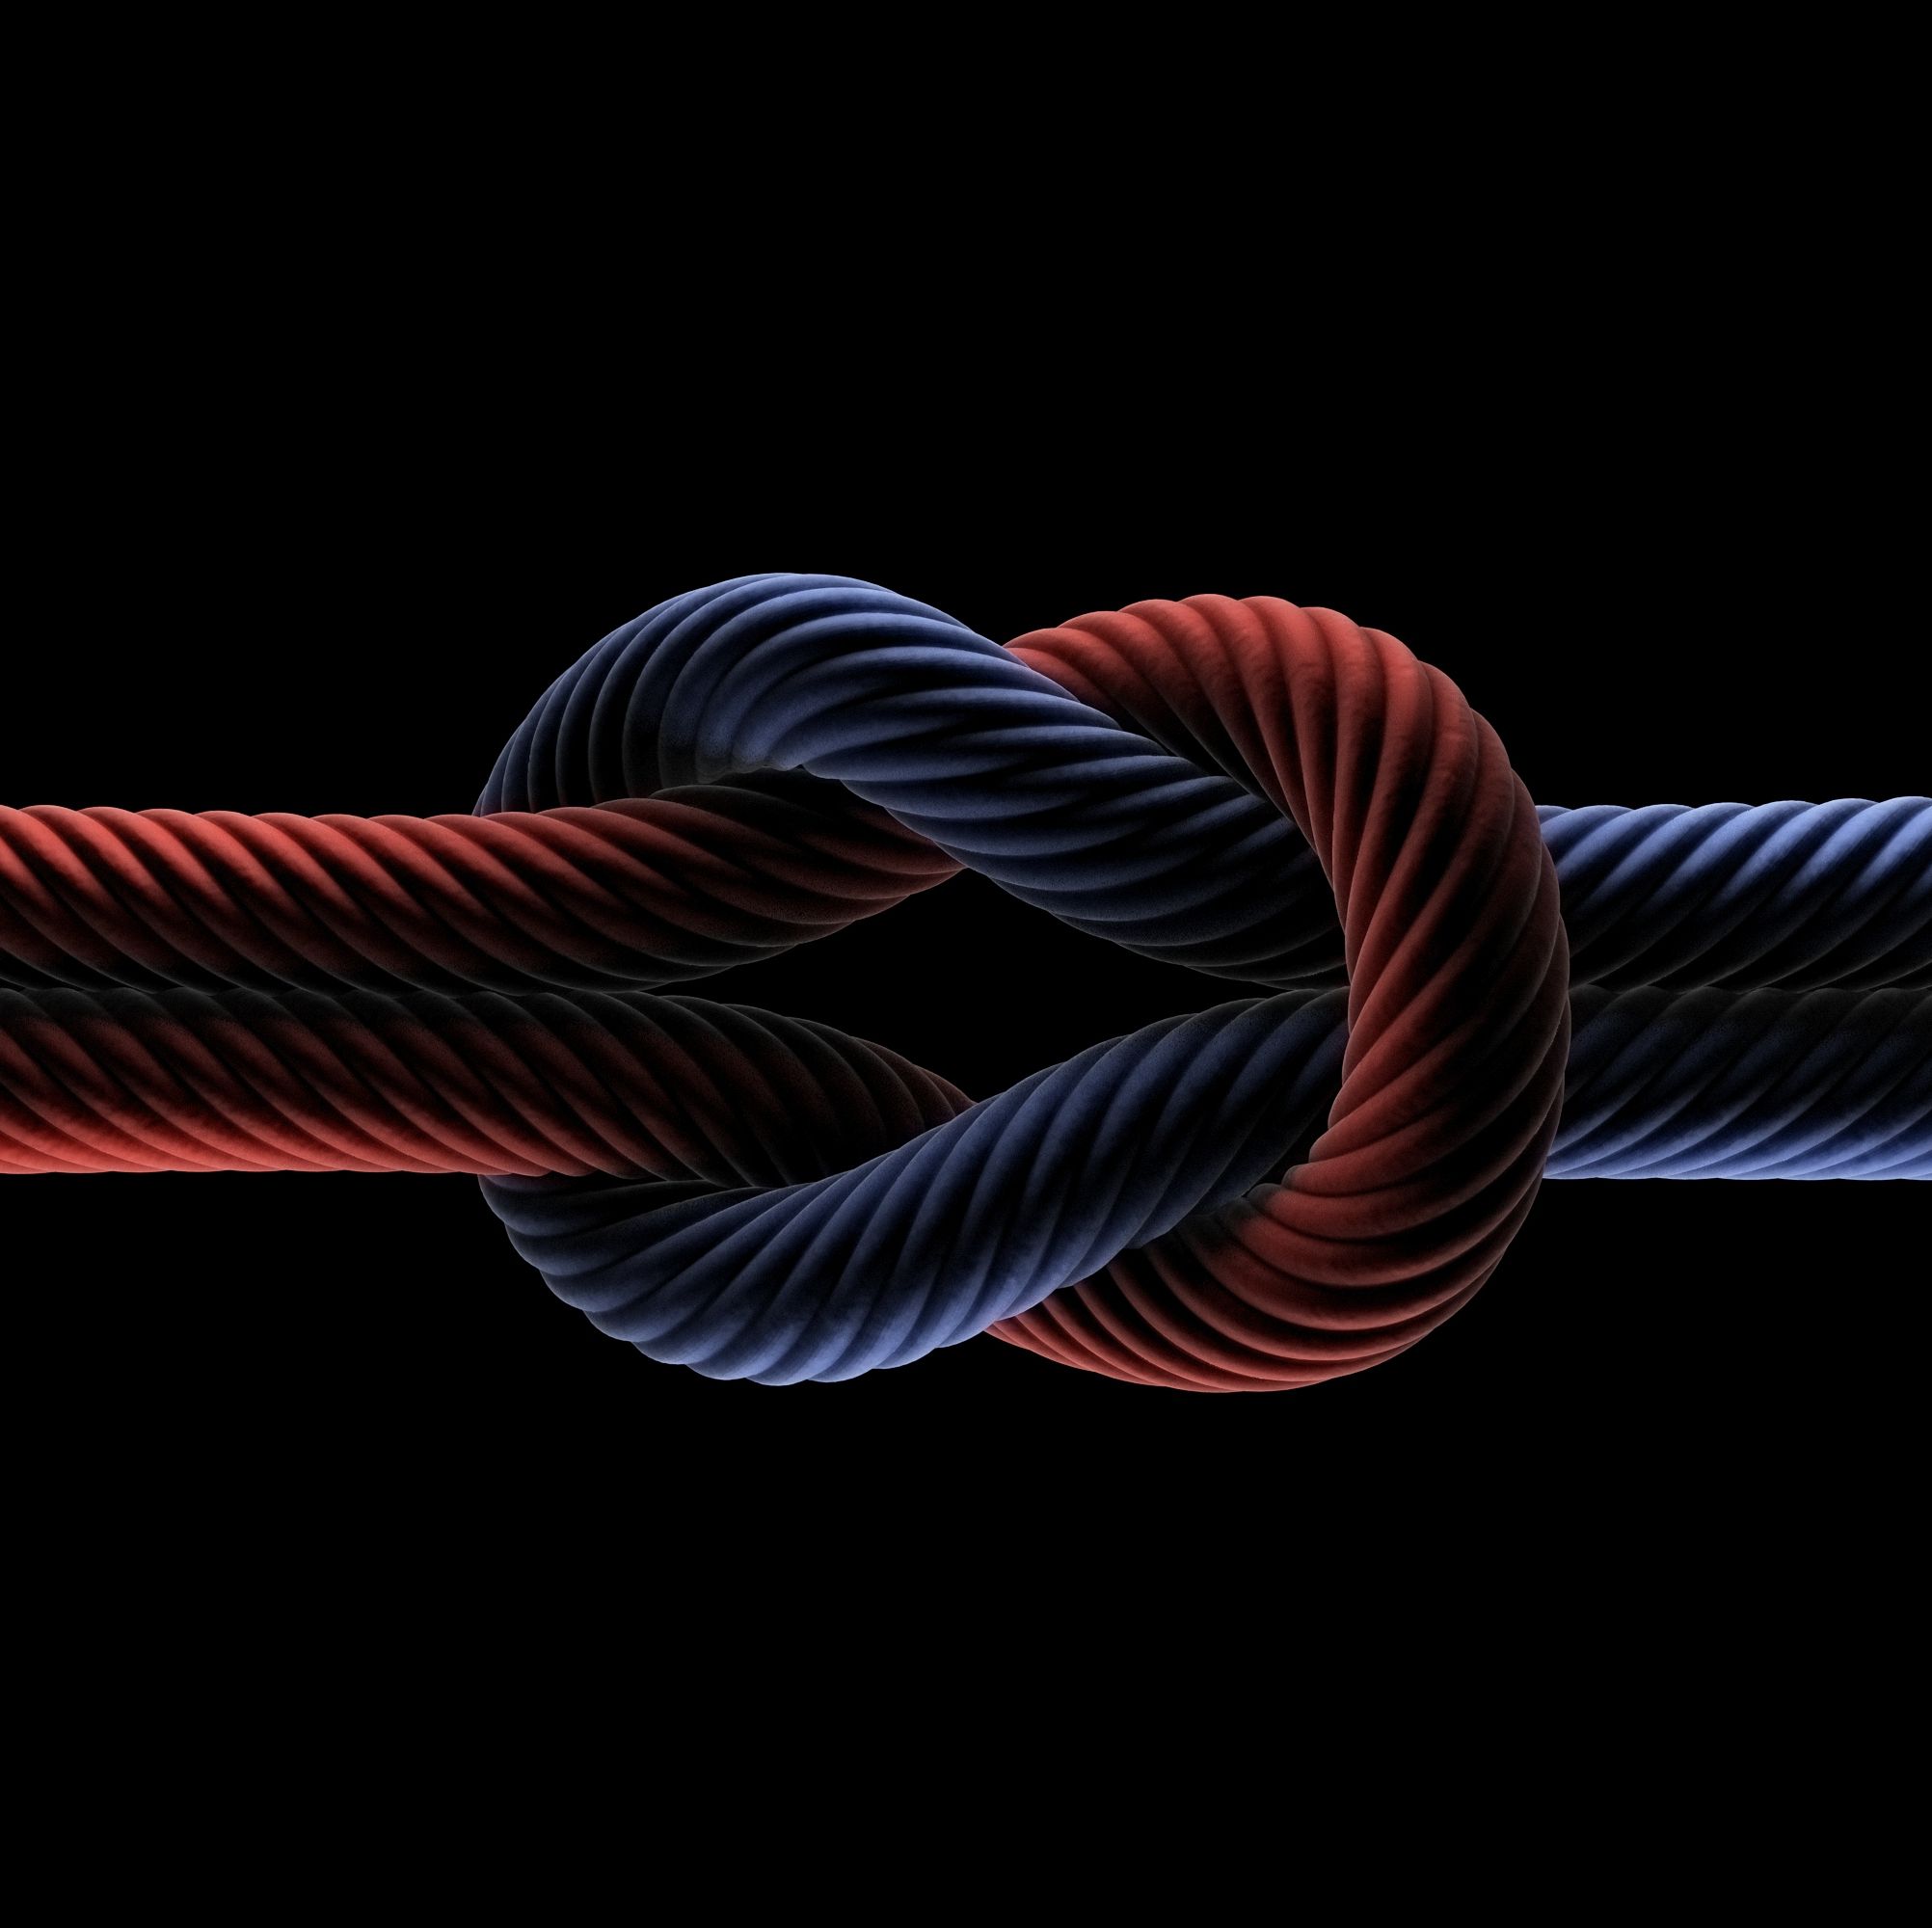 Chemists Just Tied the Tiniest Knot Ever—Even Smaller Than a Cell